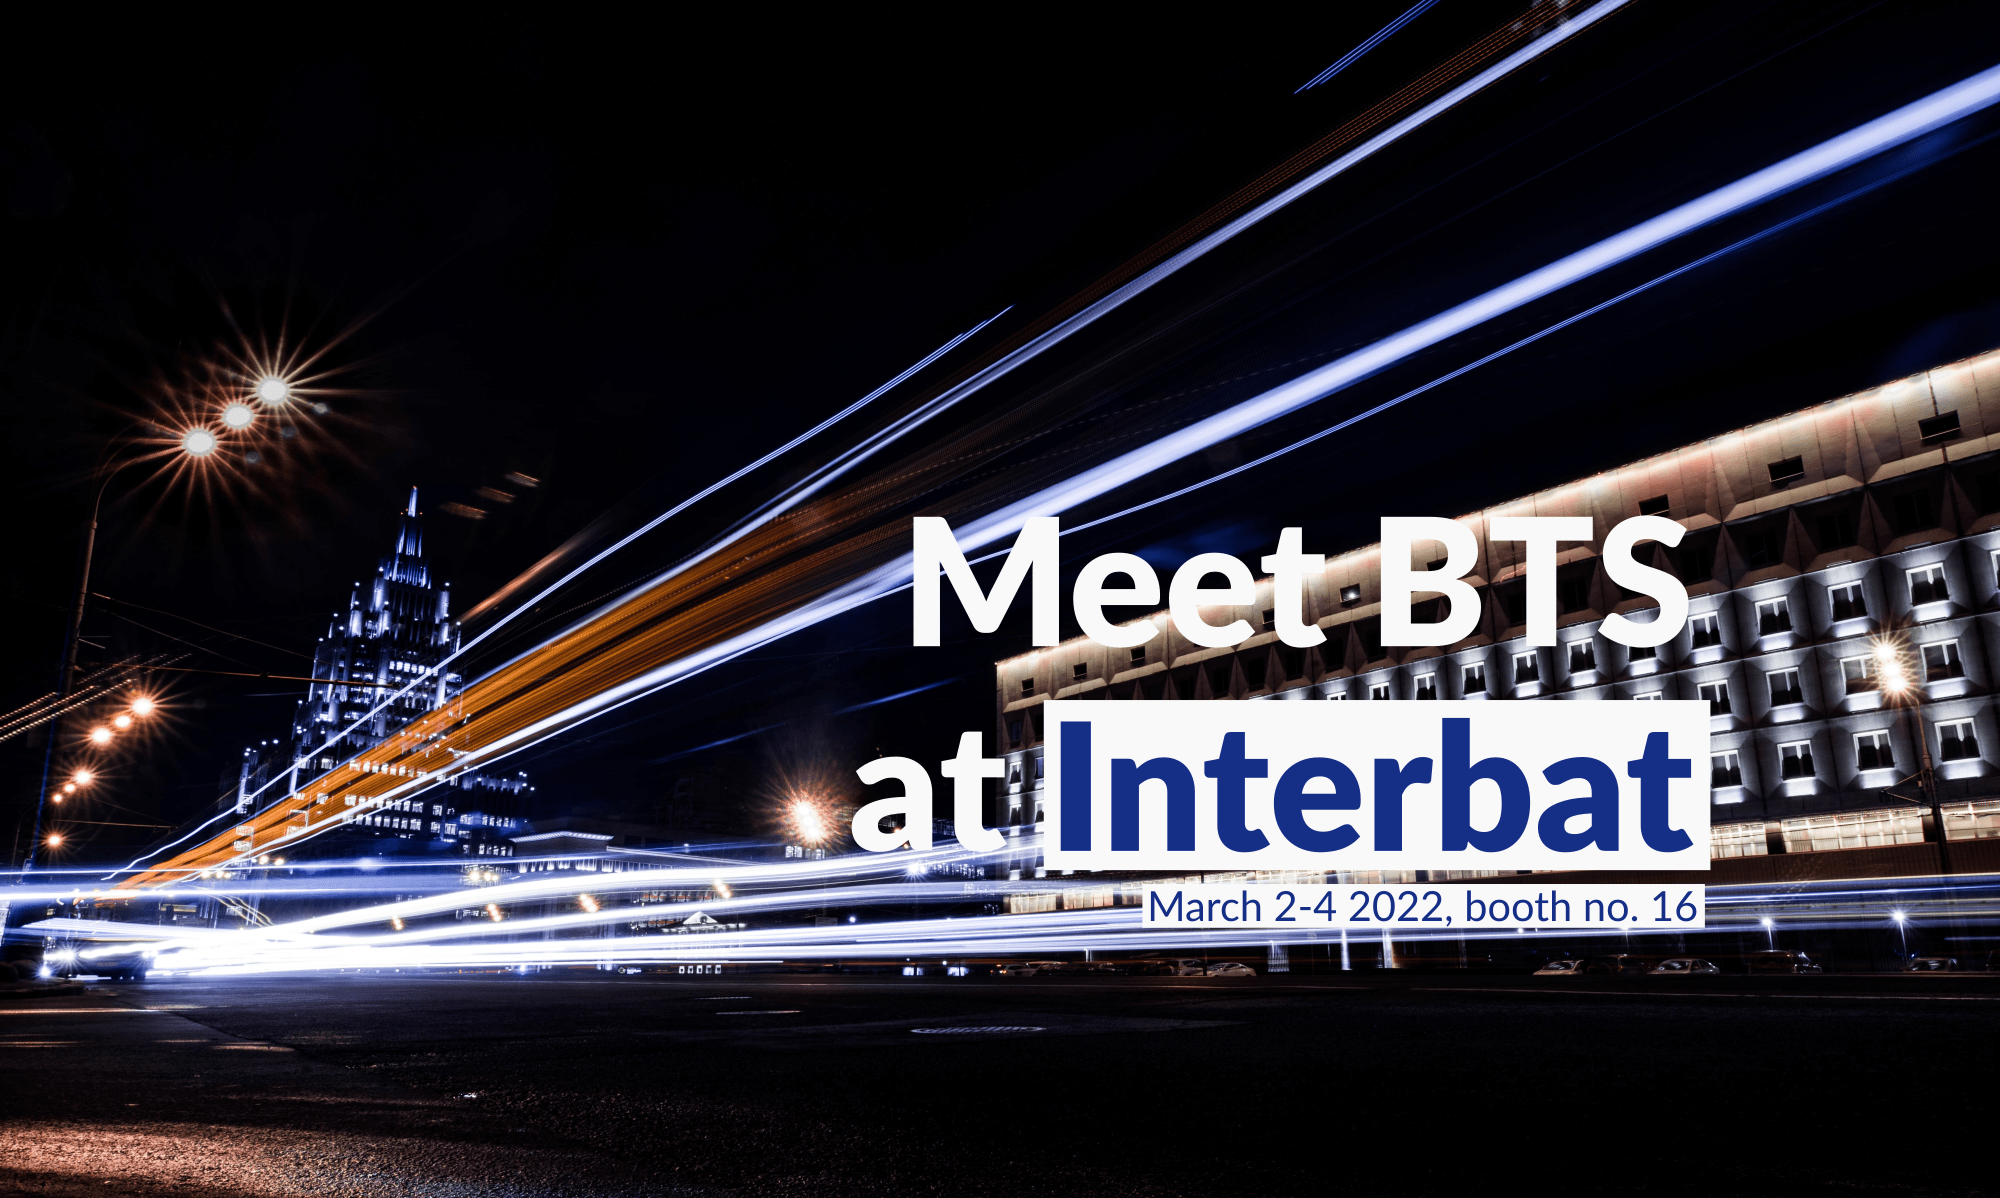 Don't miss the chance to meet BTS at next year's Asian Battery Conference!